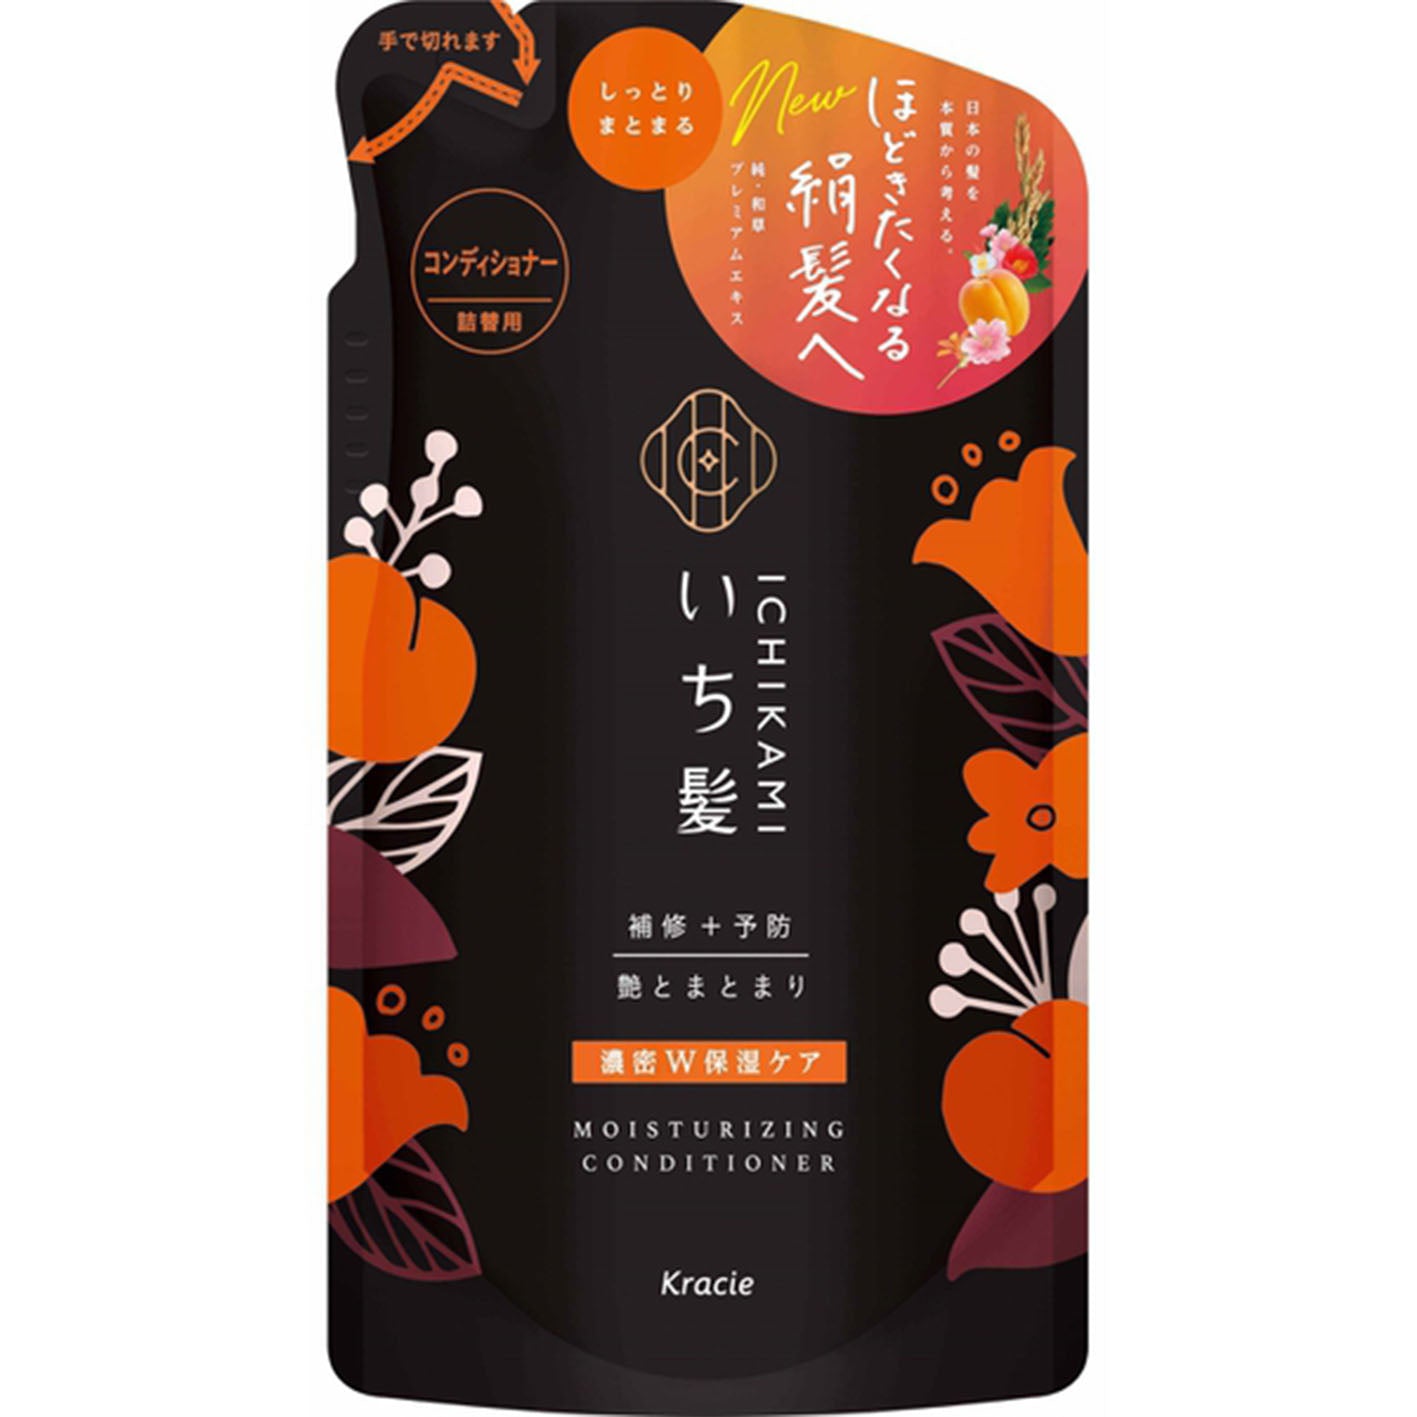 Ichikami Dense W Moisturizing Care Hair Conditioner 330ml Refill - Harajuku Culture Japan - Japanease Products Store Beauty and Stationery